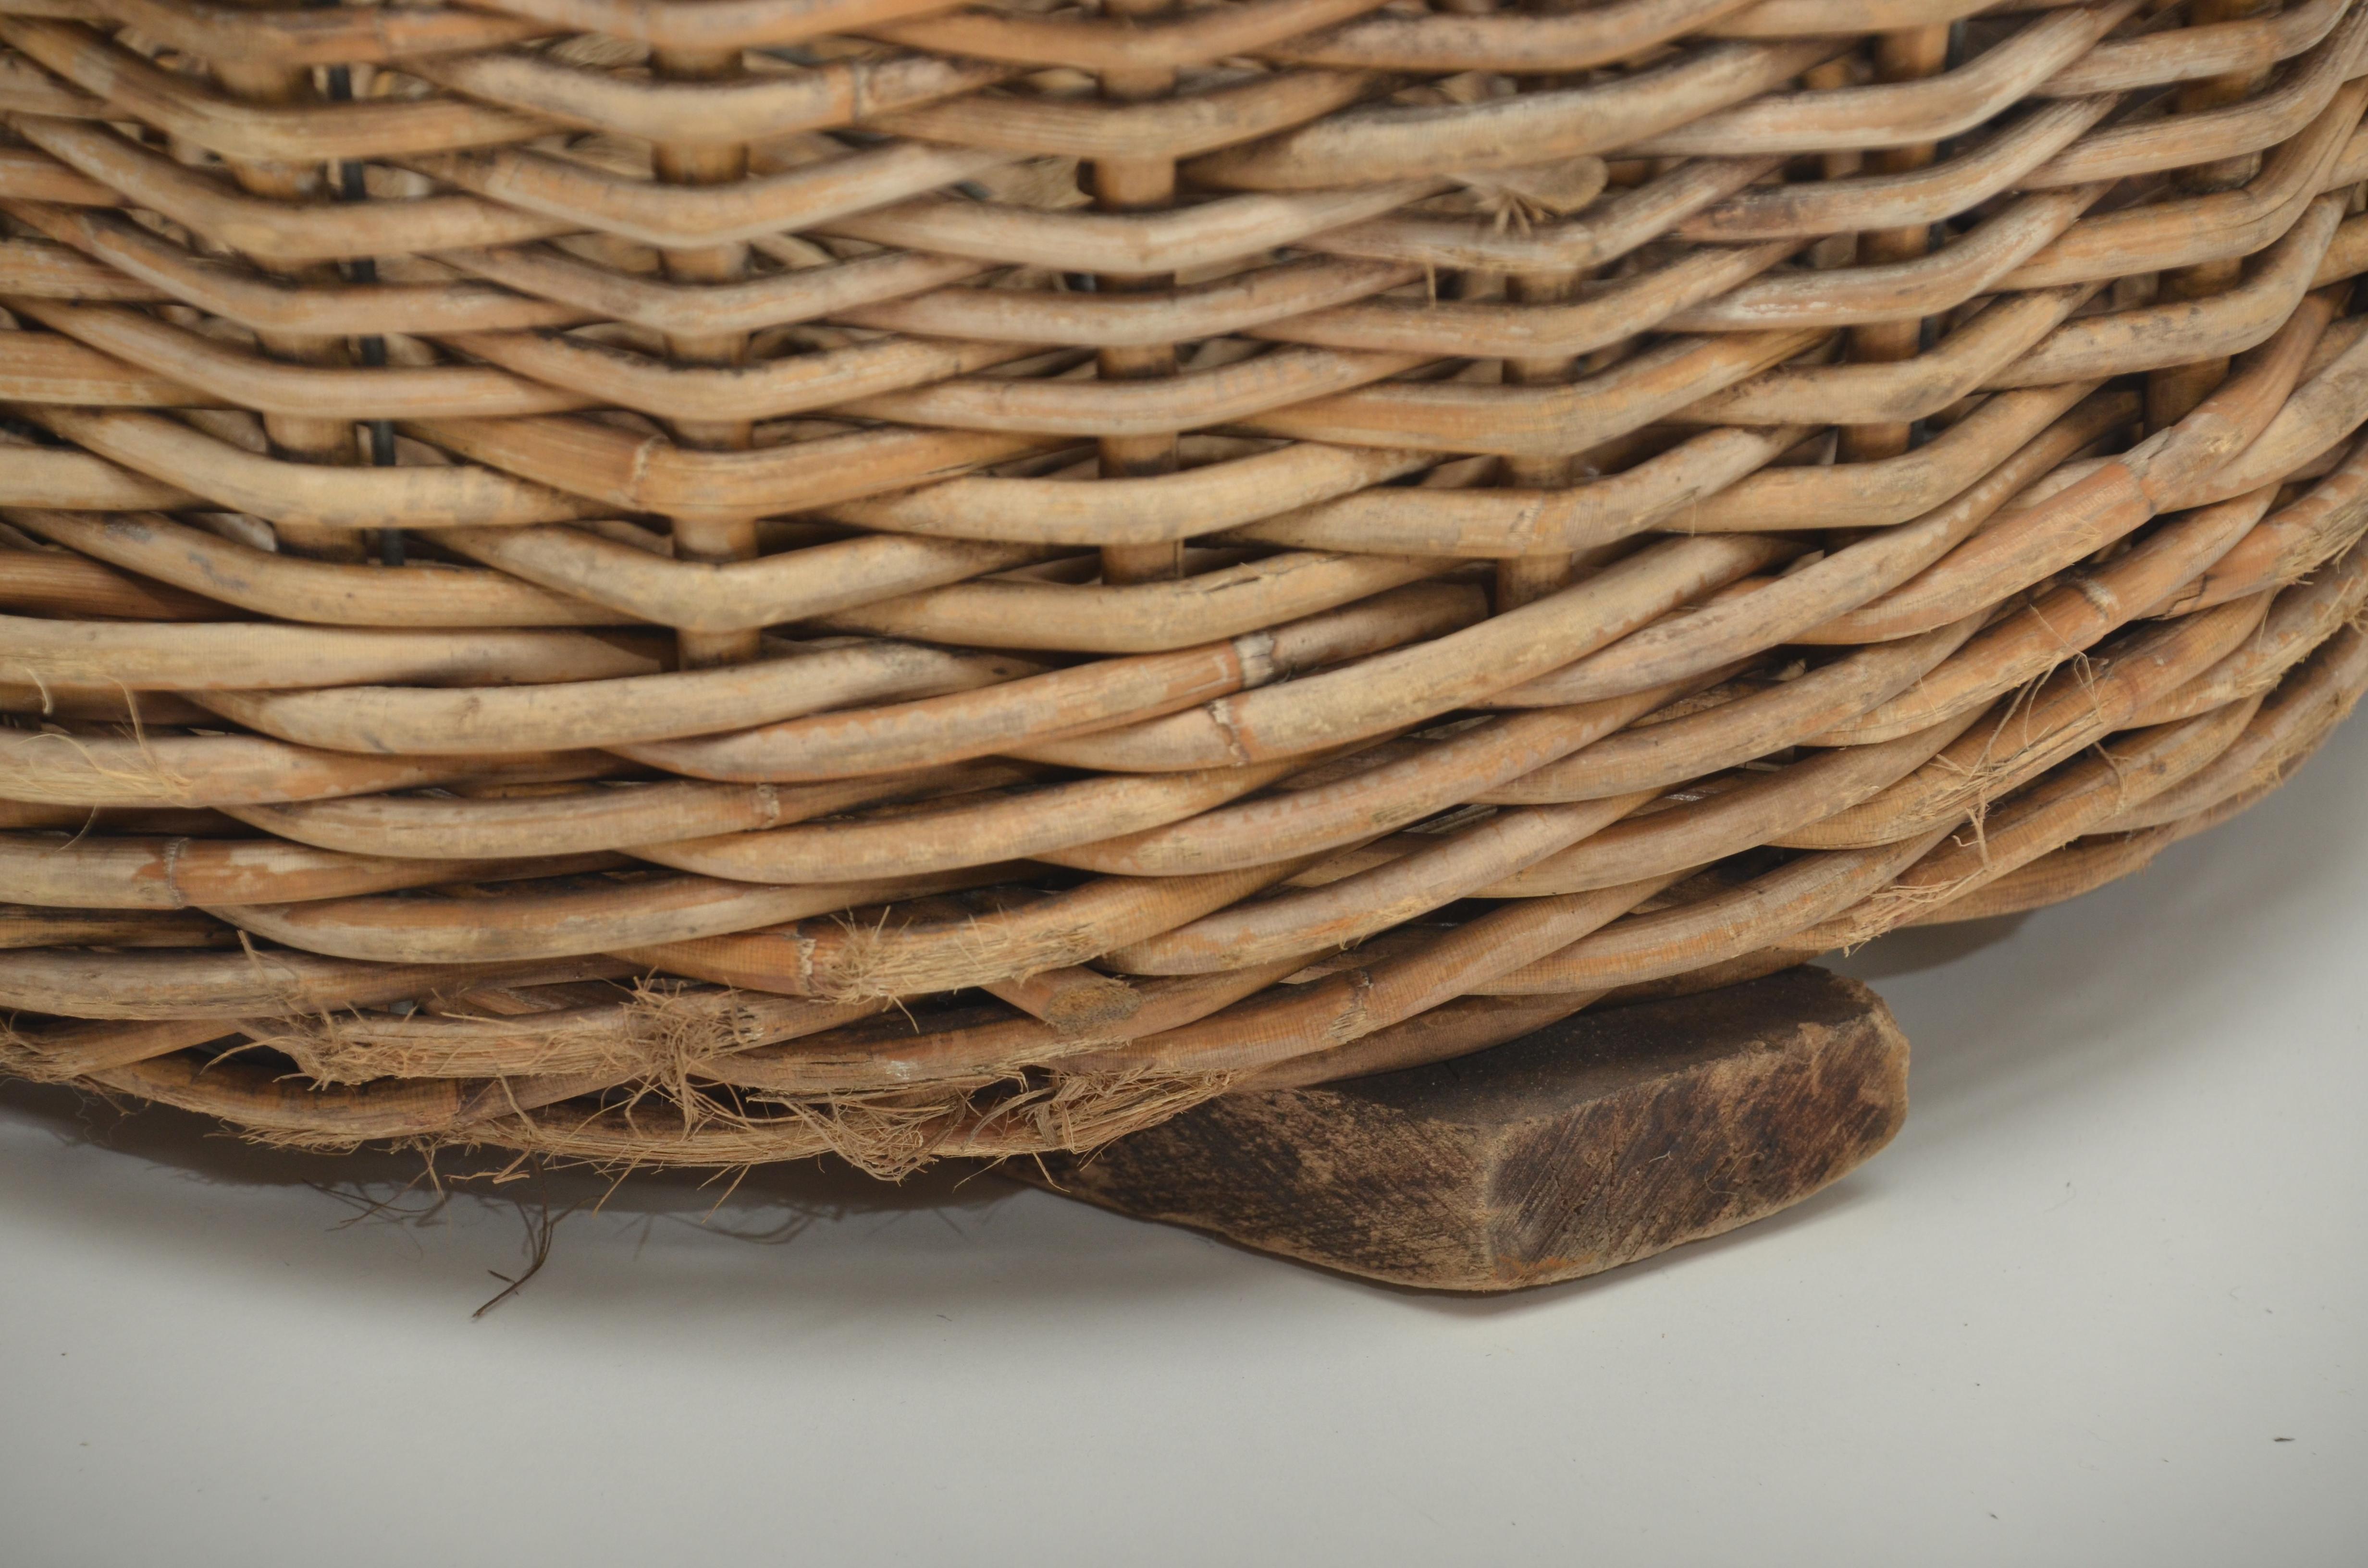 Wicker fish baskets from the south of France.